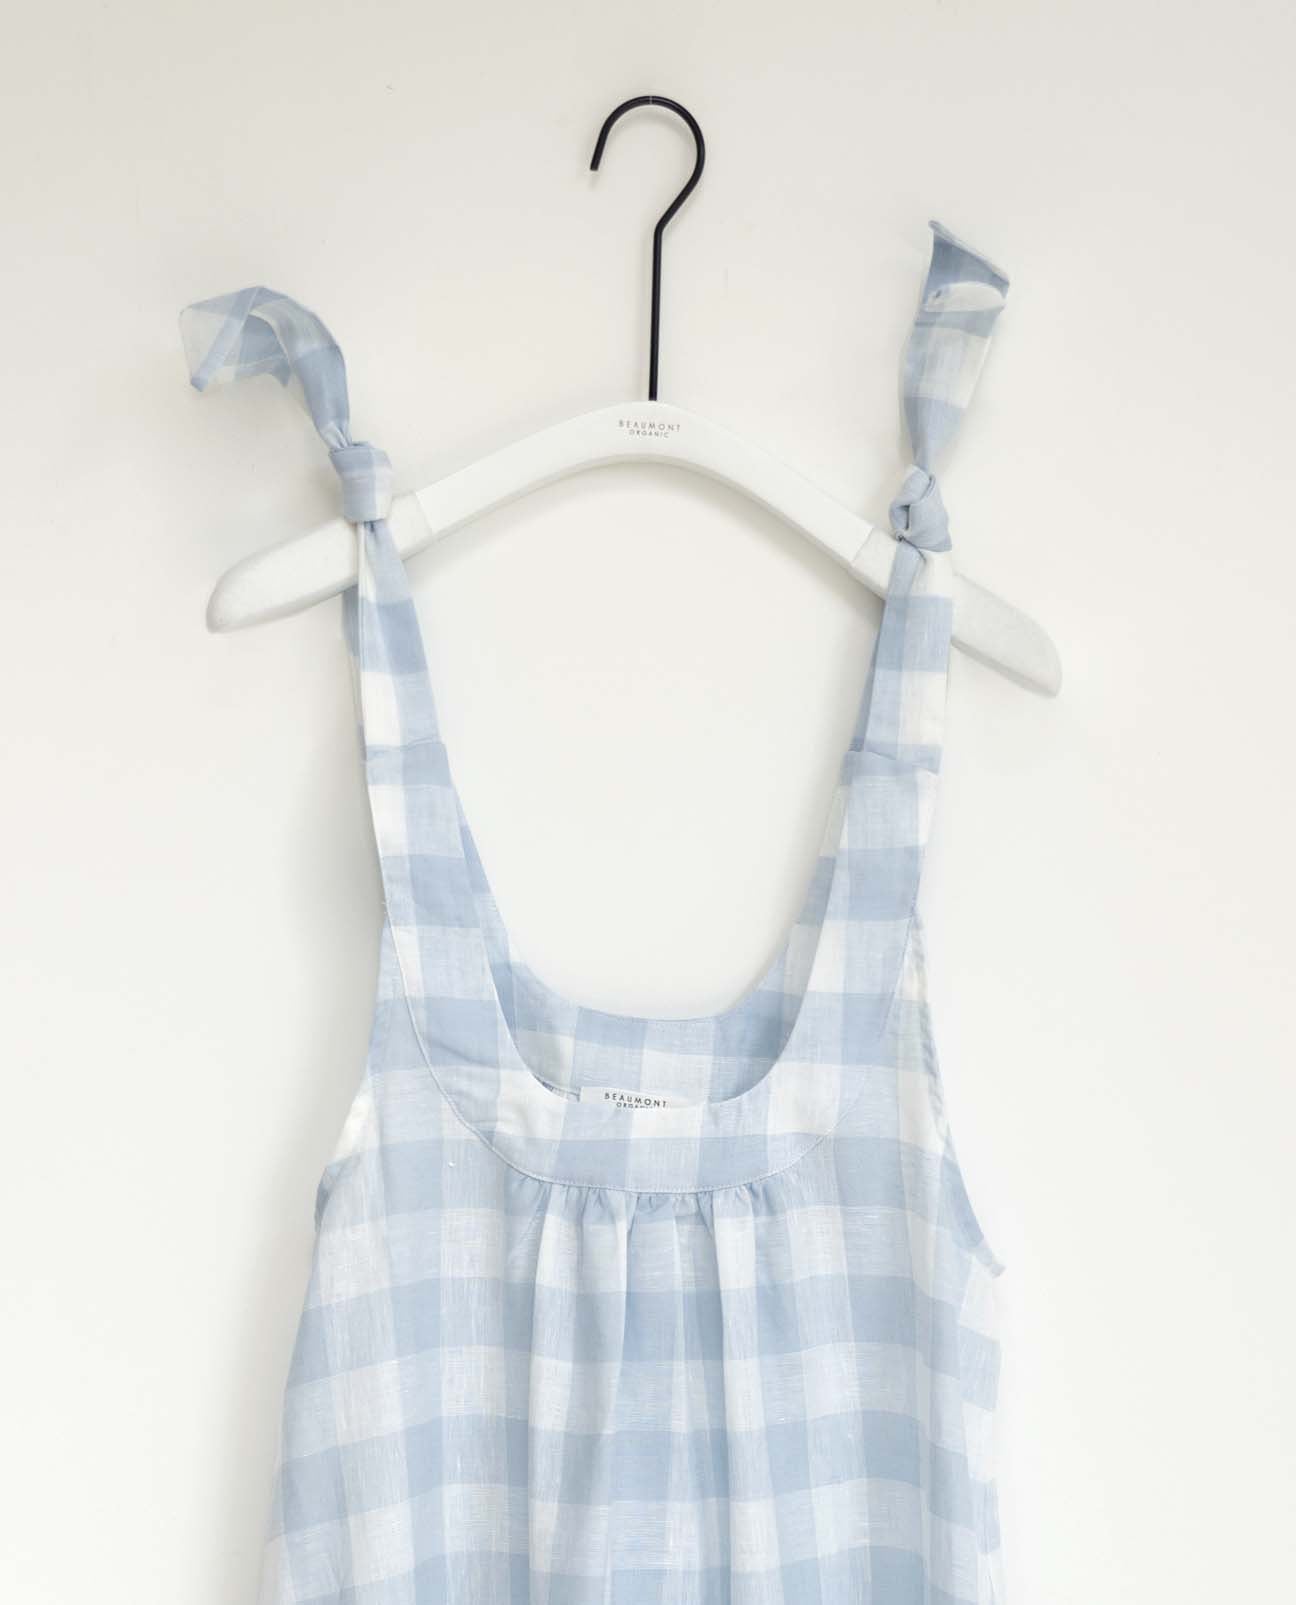 Pansy-Gee Linen Gingham Dress In Pale Blue